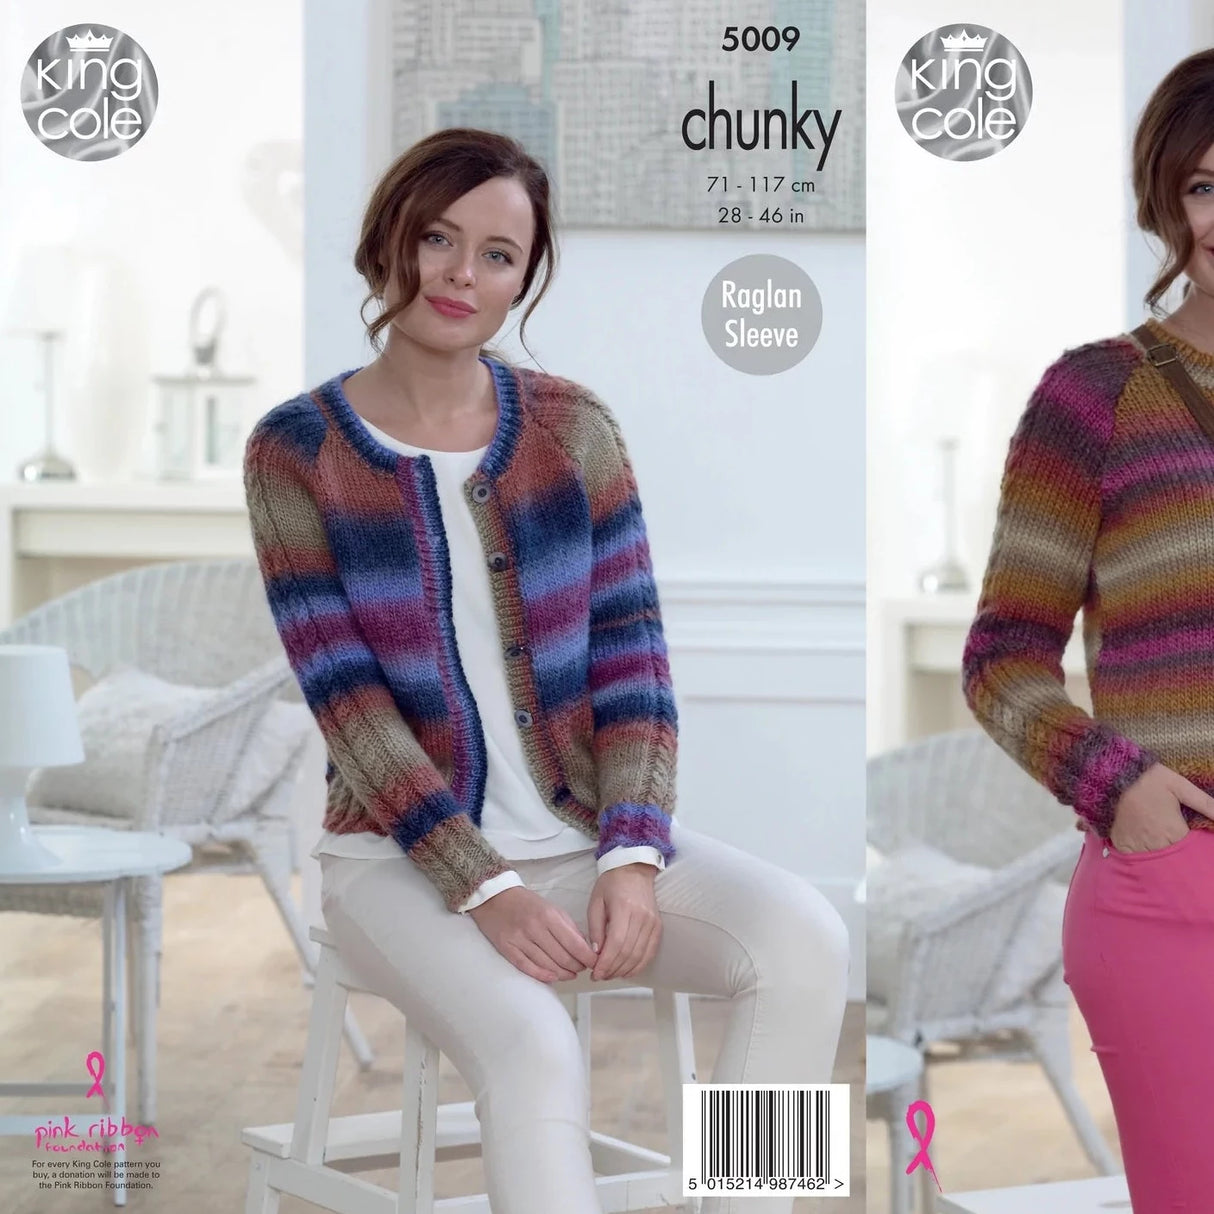 King Cole Chunky Pattern 5009